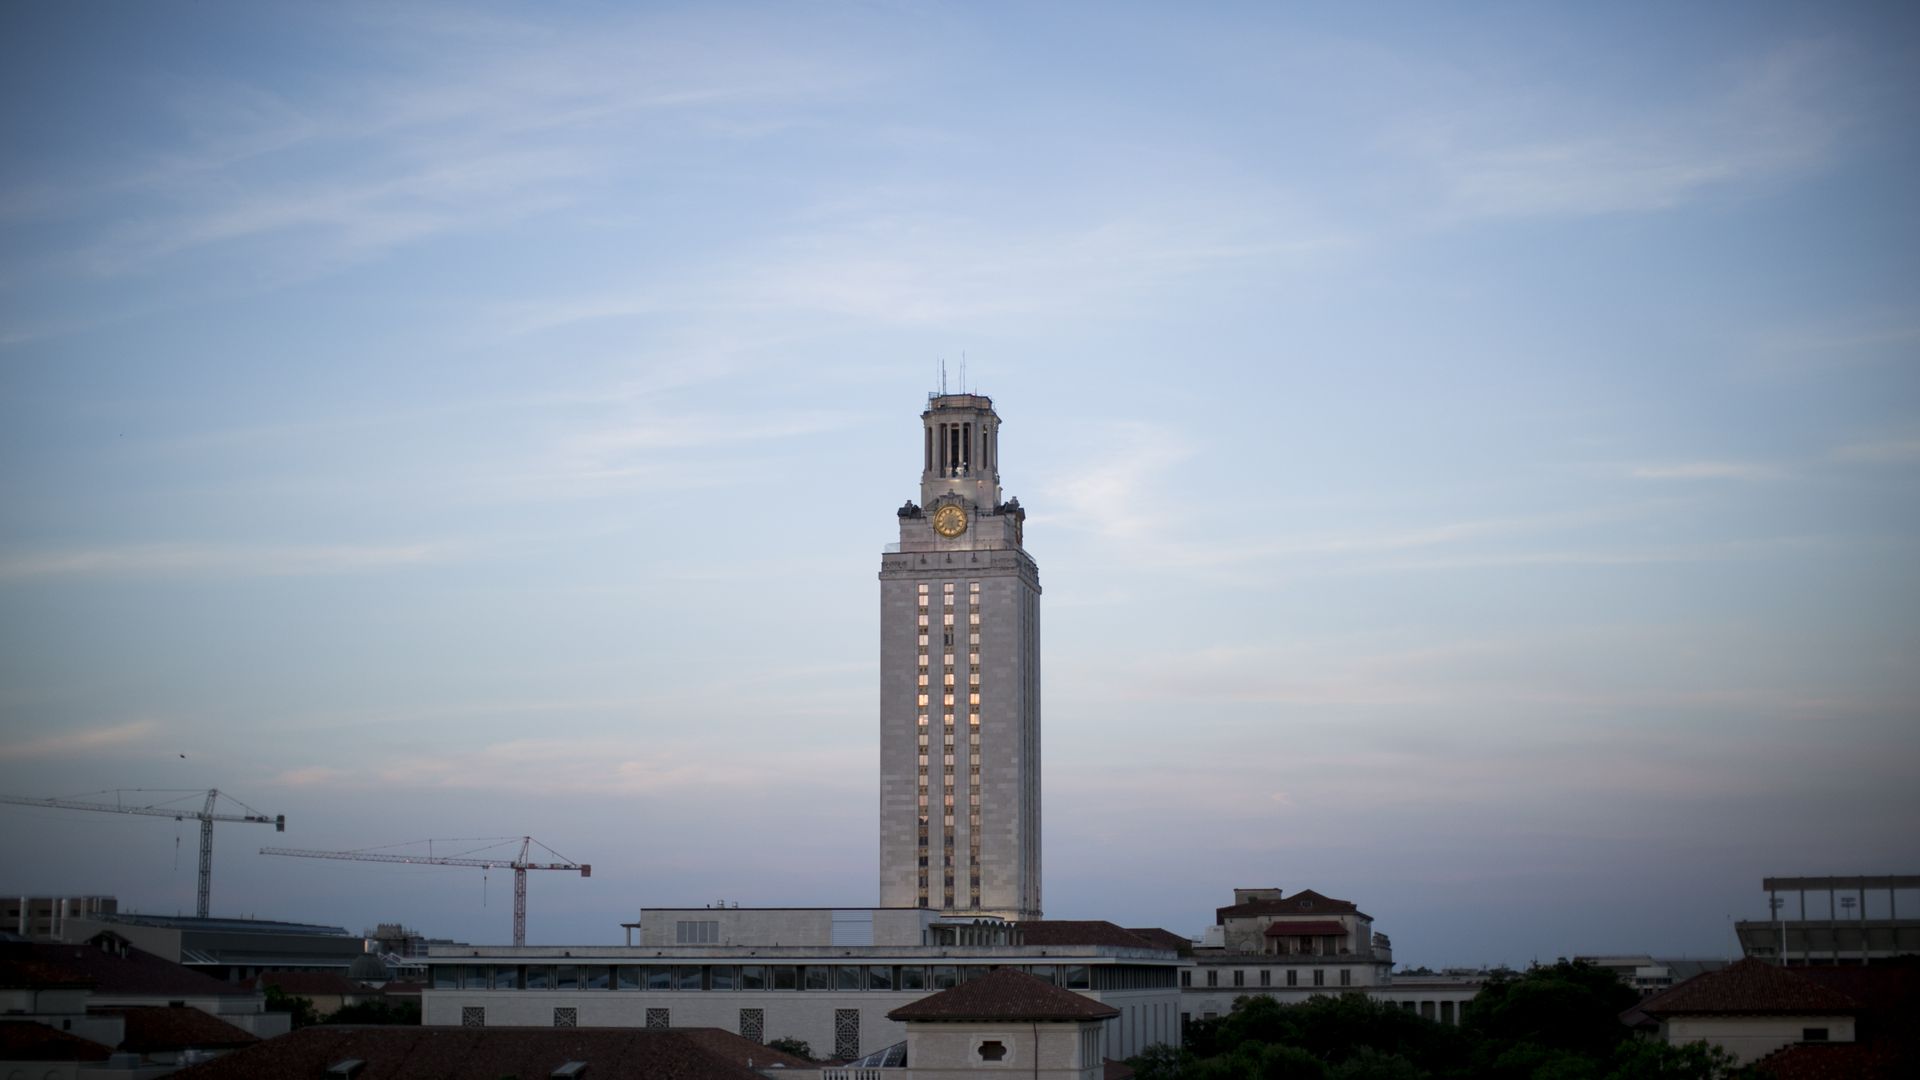 The administrative tower at the University of Texas.